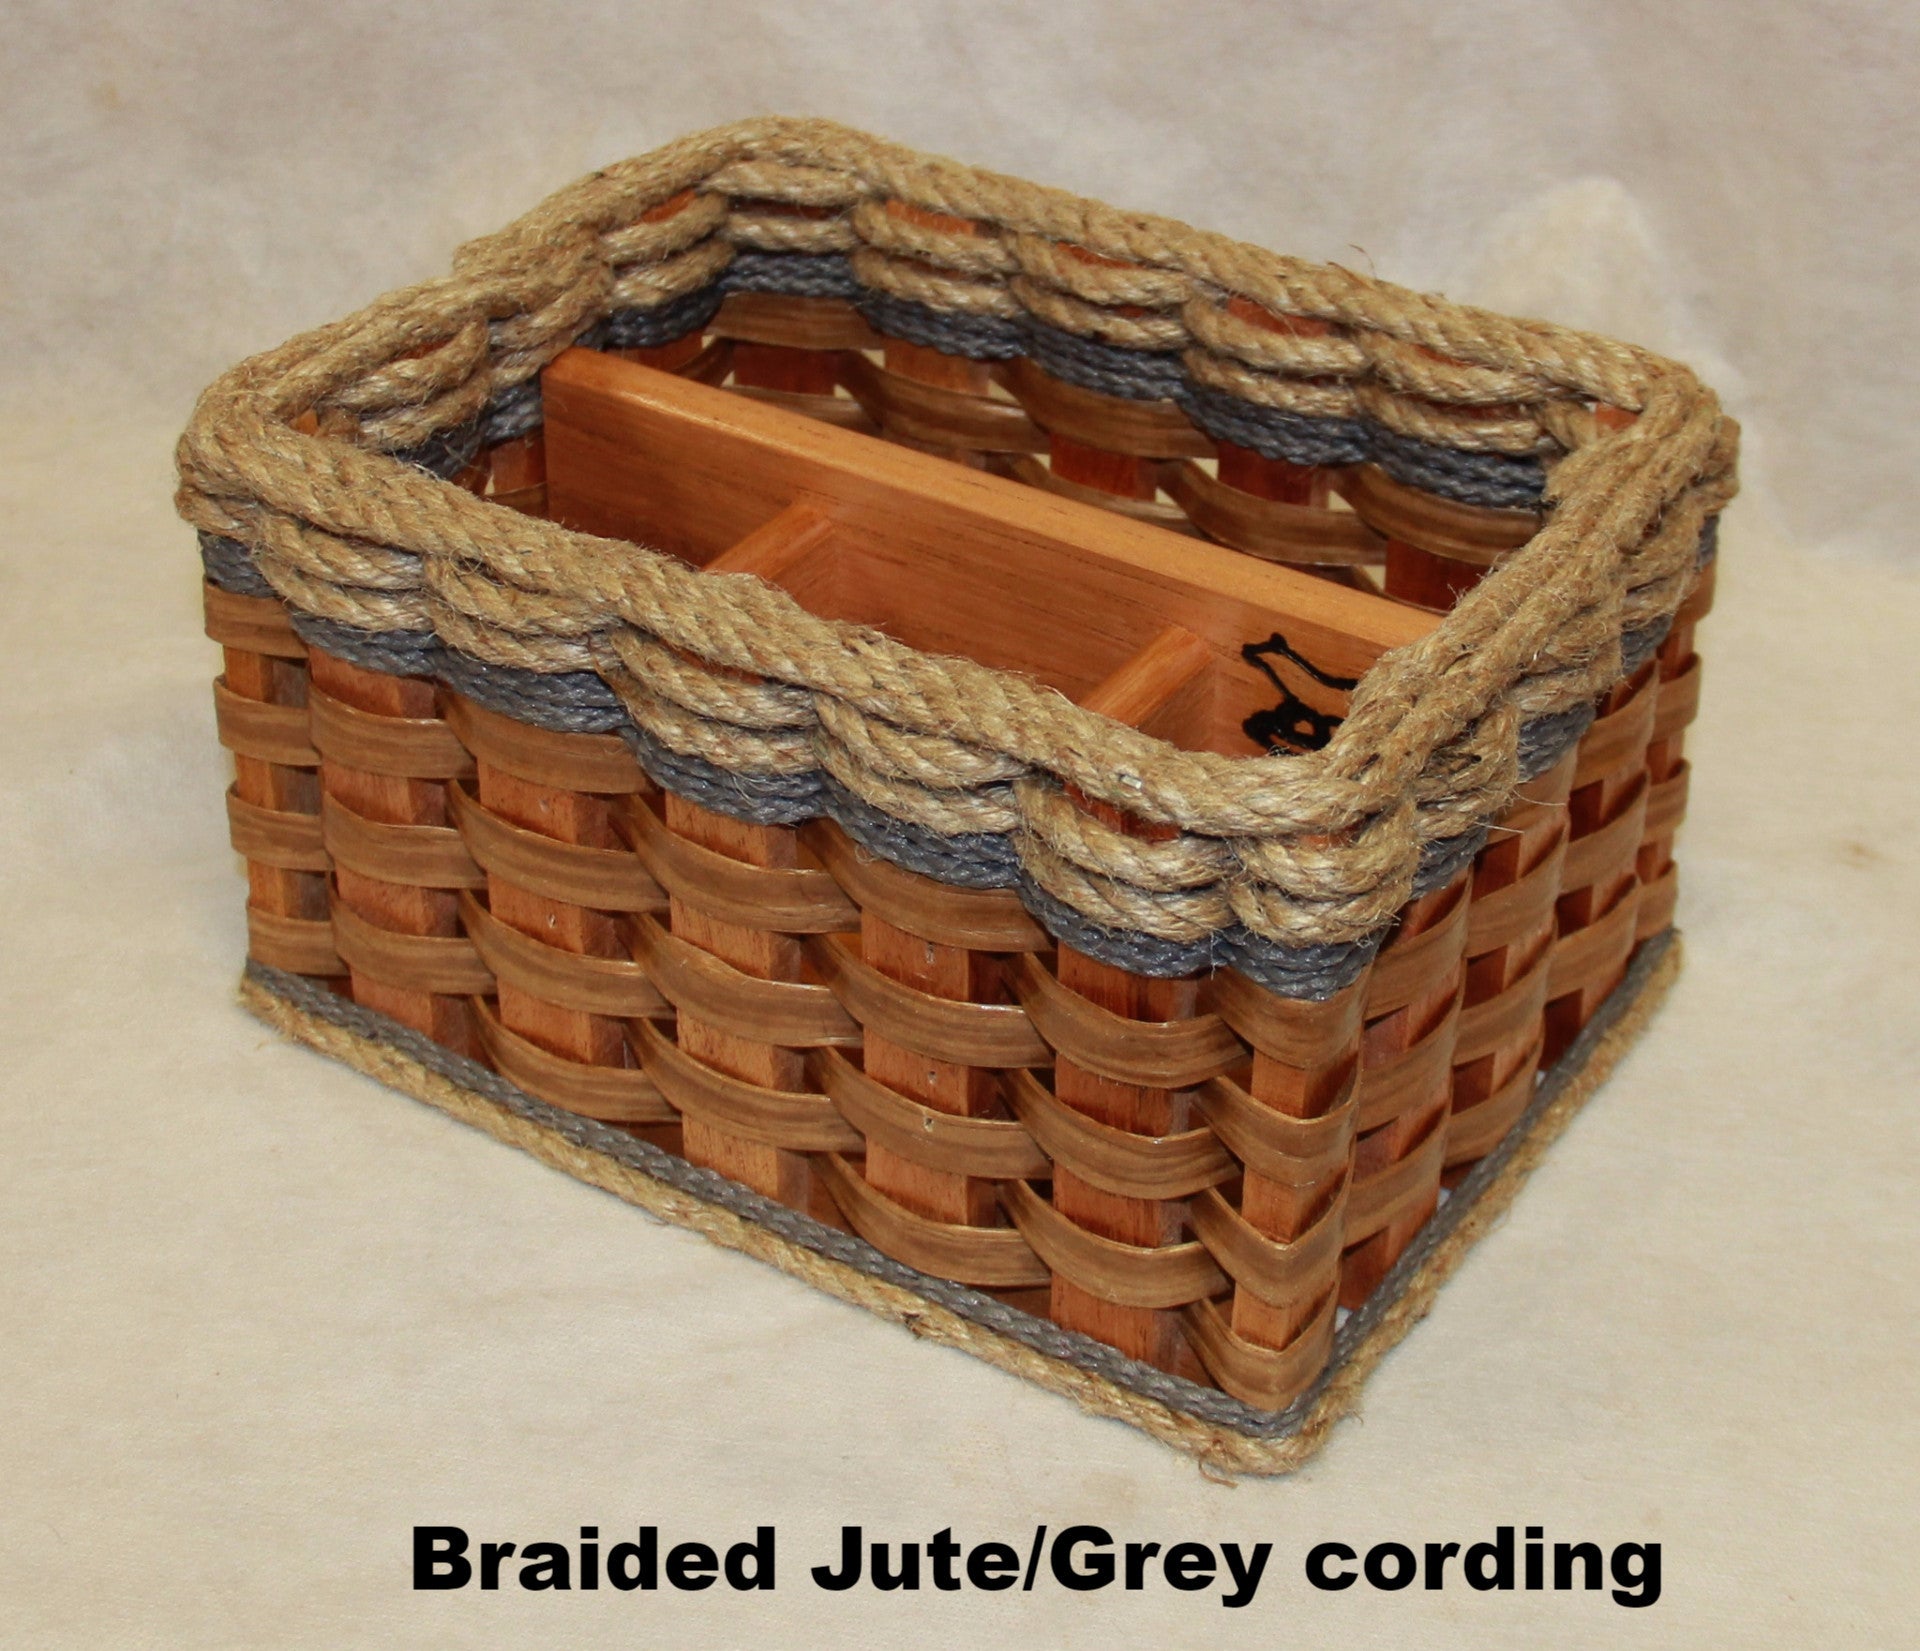 Silverware Basket--Shabby Chic Collection